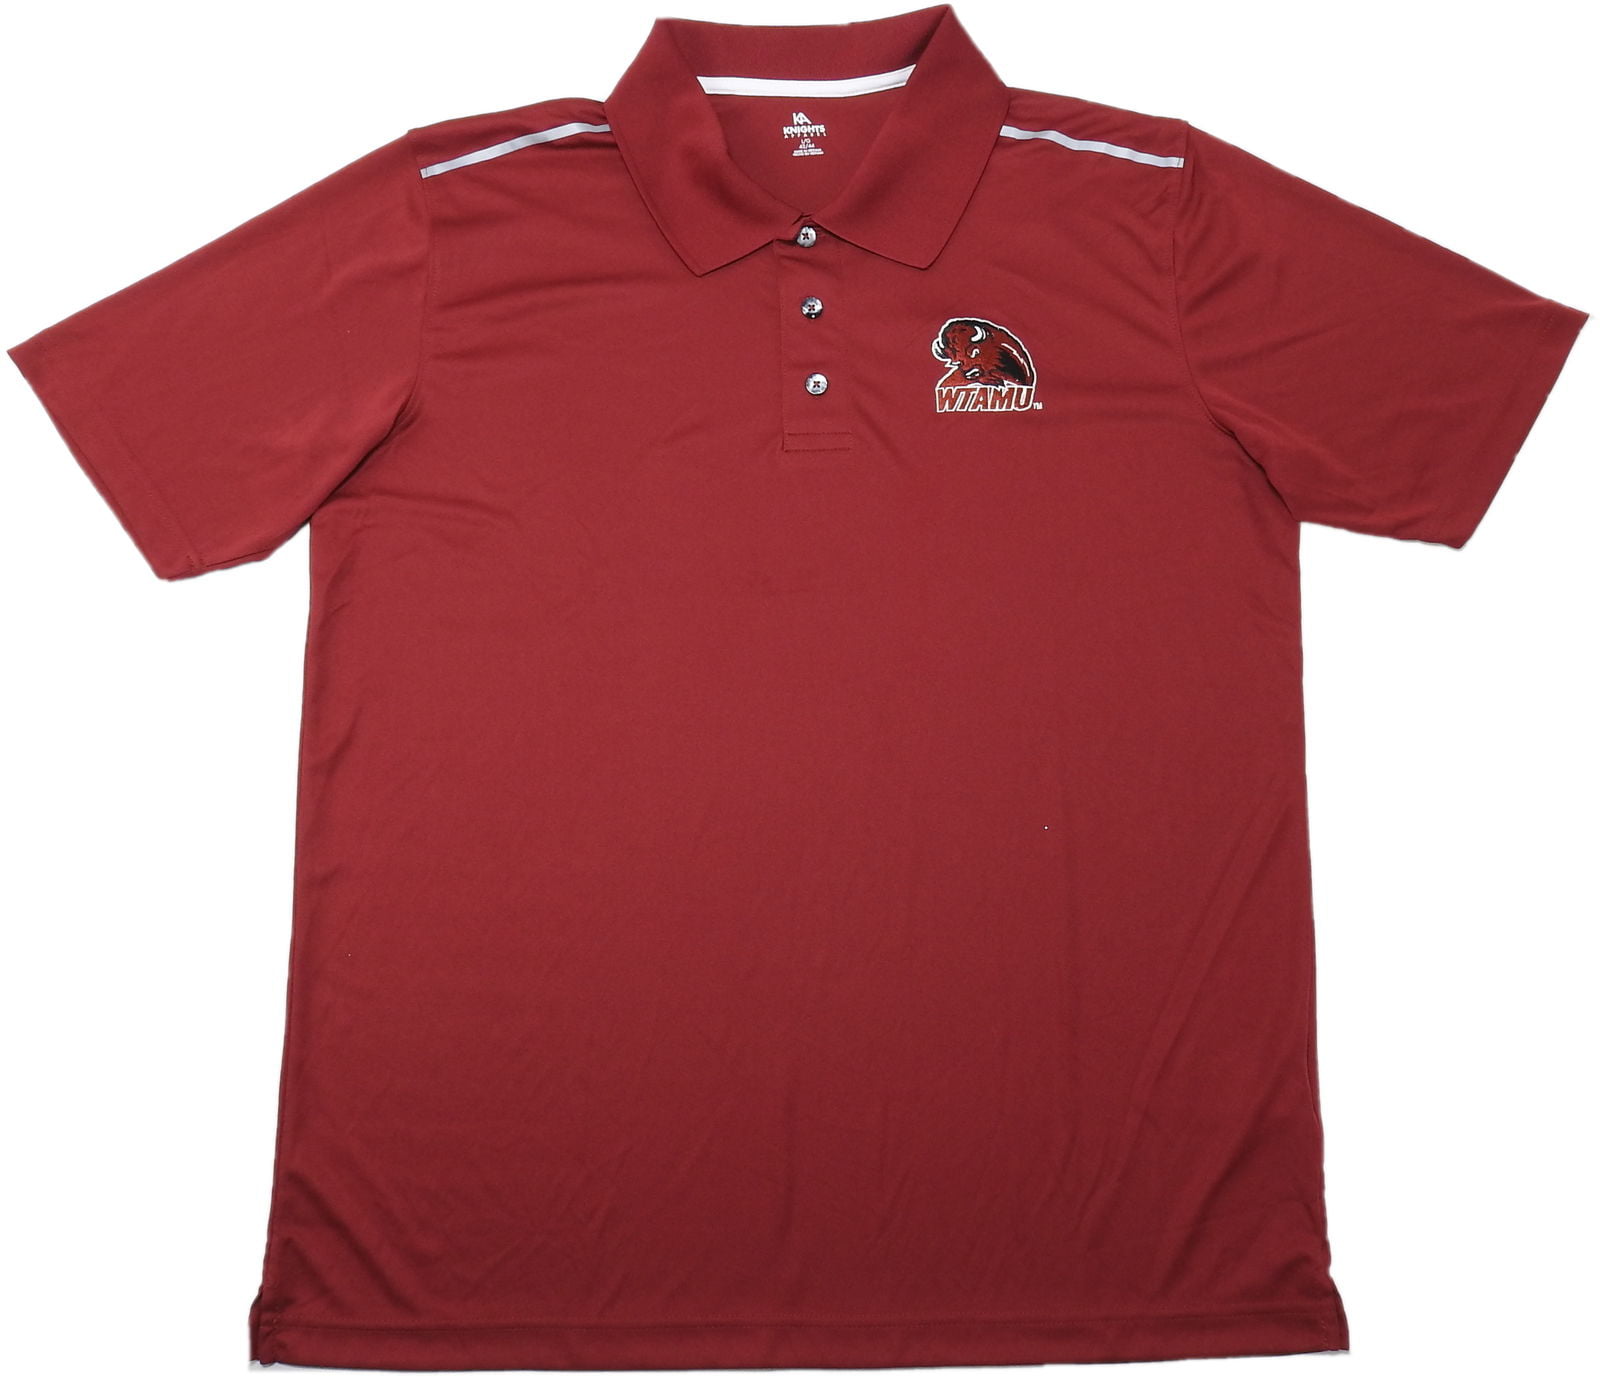 Maroon & White Color Block Knights Apparel Men's West Texas A&M Polo Shirt 